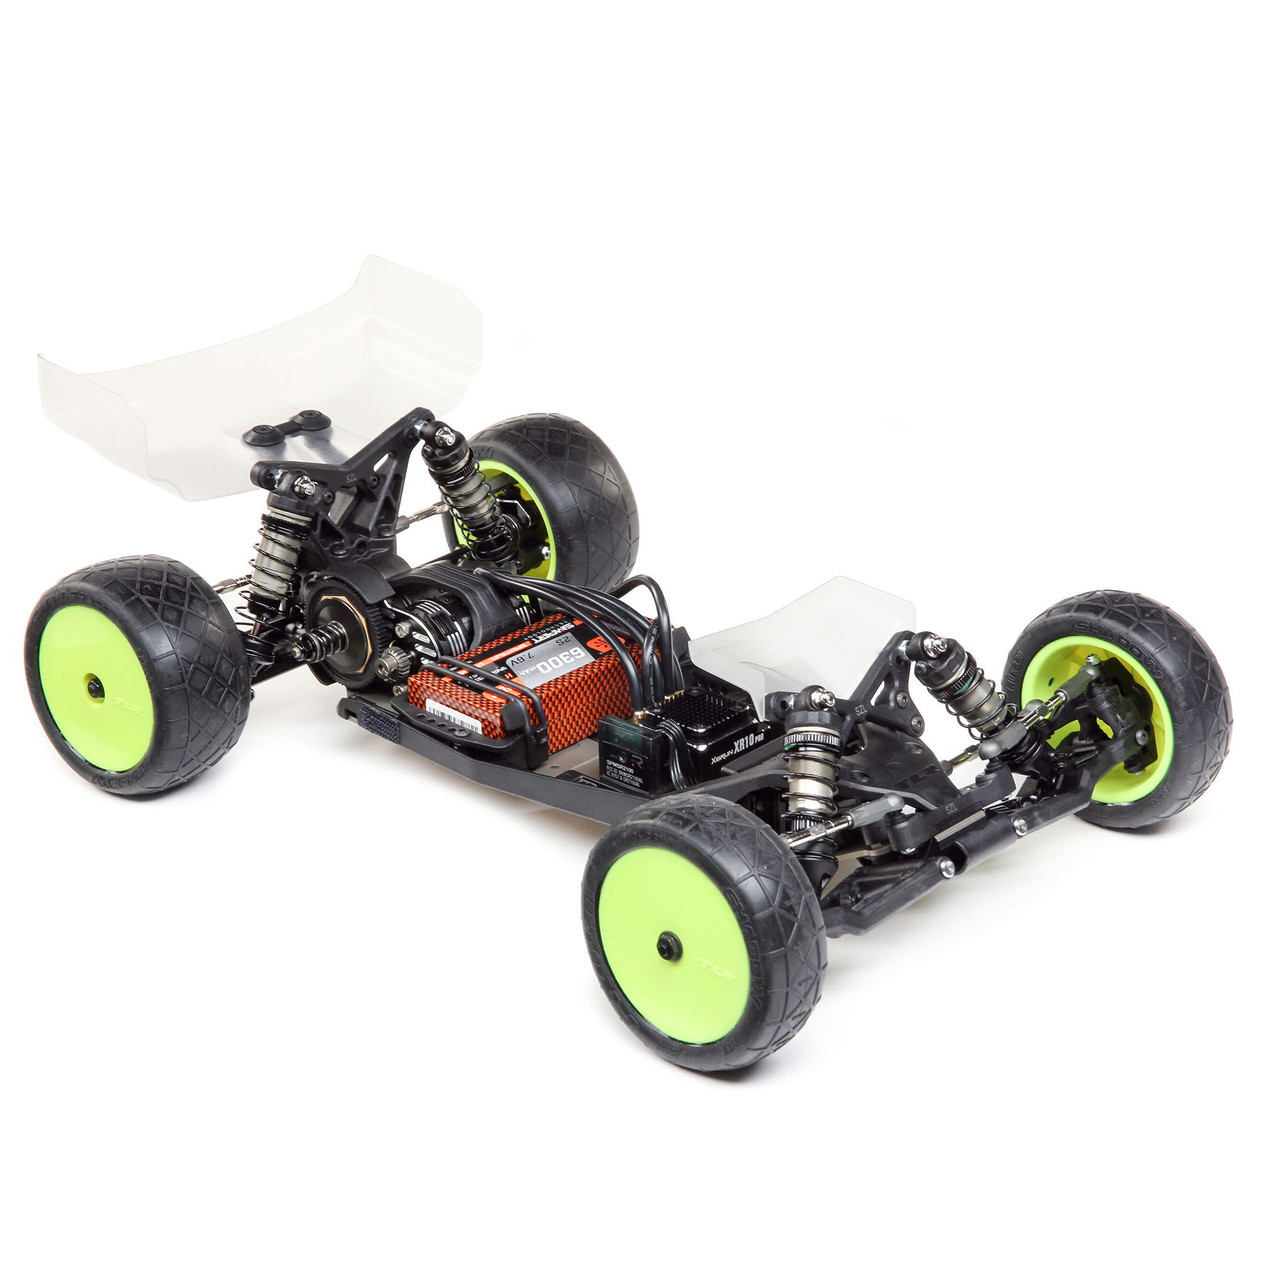 Team Losi Racing 22 5.0 DC Race Roller 1/10 2WD Electric Buggy Kit (Dirt/Clay)